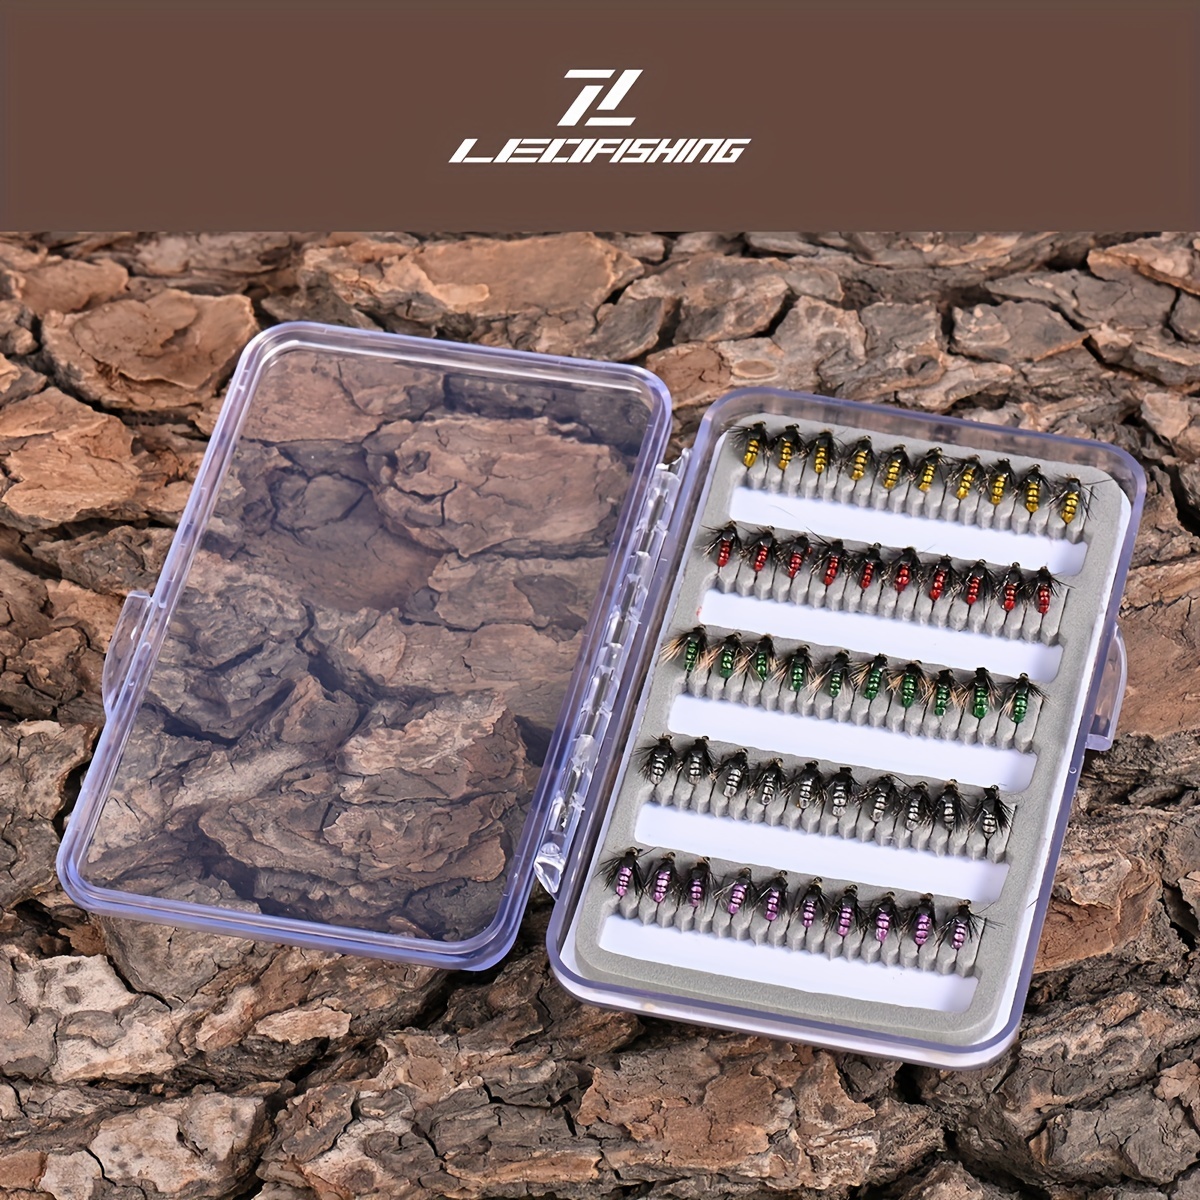 LEOFISHING 50pcs Artificial Bionic Flies Bait Hooks, Dry/Wet Fly Fishing  Lures With Waterproof Box, Fishing Gear For Freshwater And Saltwater